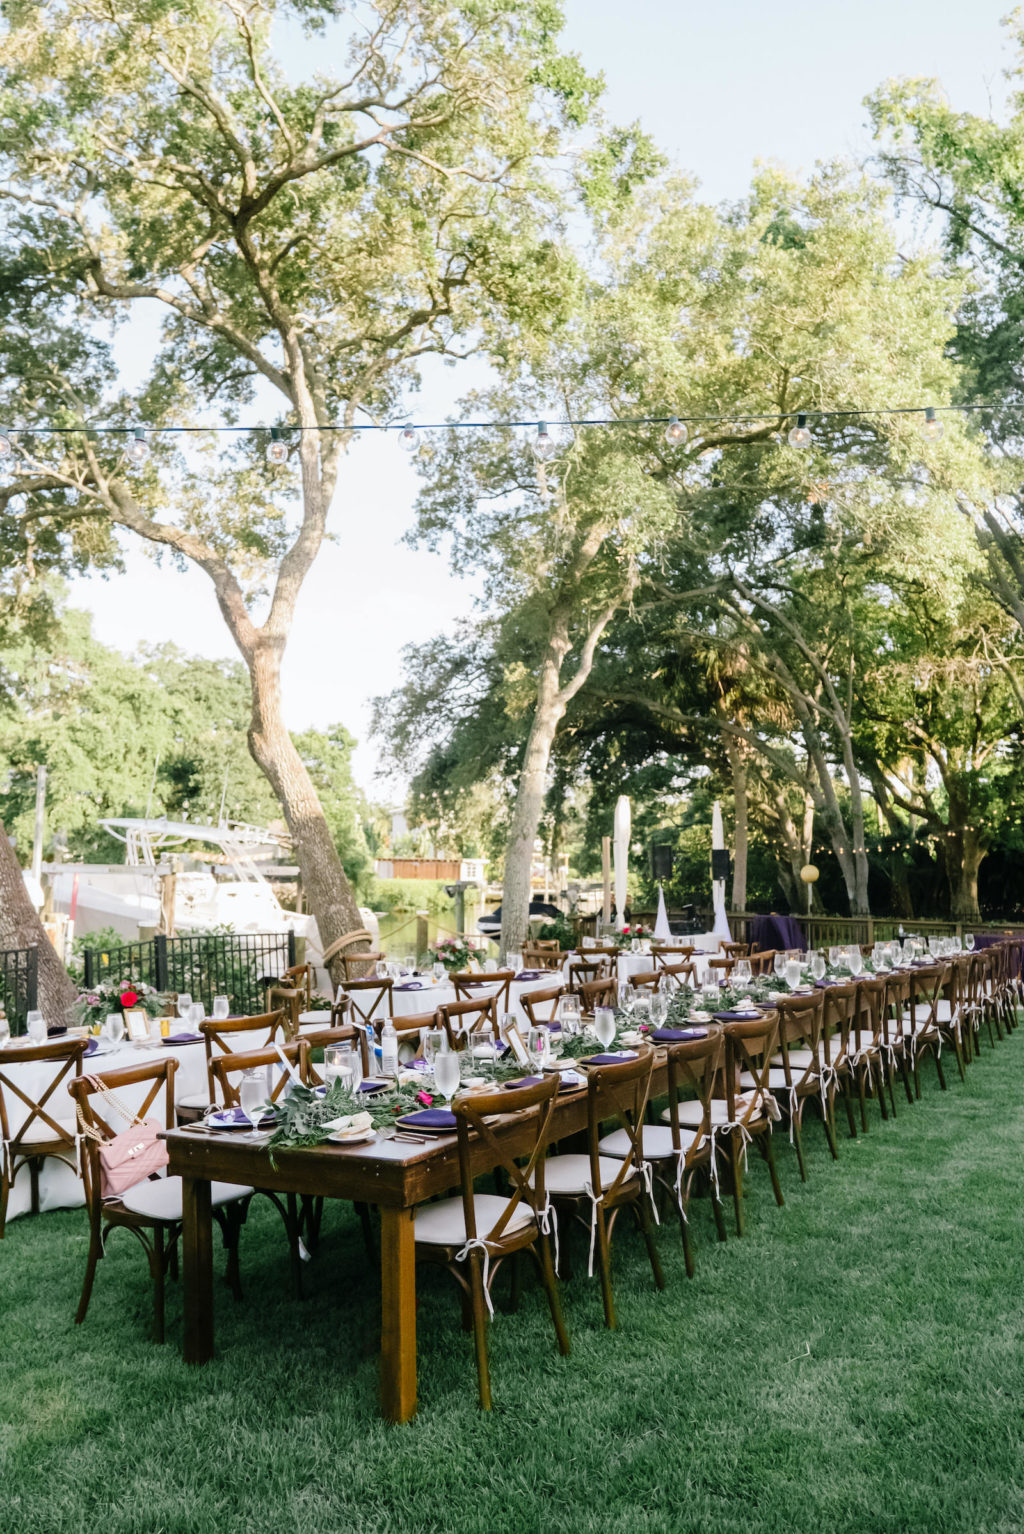 Romantic Outdoor Backyard Reception, Long Wooden Feasting Tables with Farmhouse Chairs, Purple Linens | South Tampa Wedding Planner Breezin' Weddings | Beach Park Wedding Rentals Outside the Box Event Rentals | Tampa Bay Wedding DJ Breezin' Entertainment